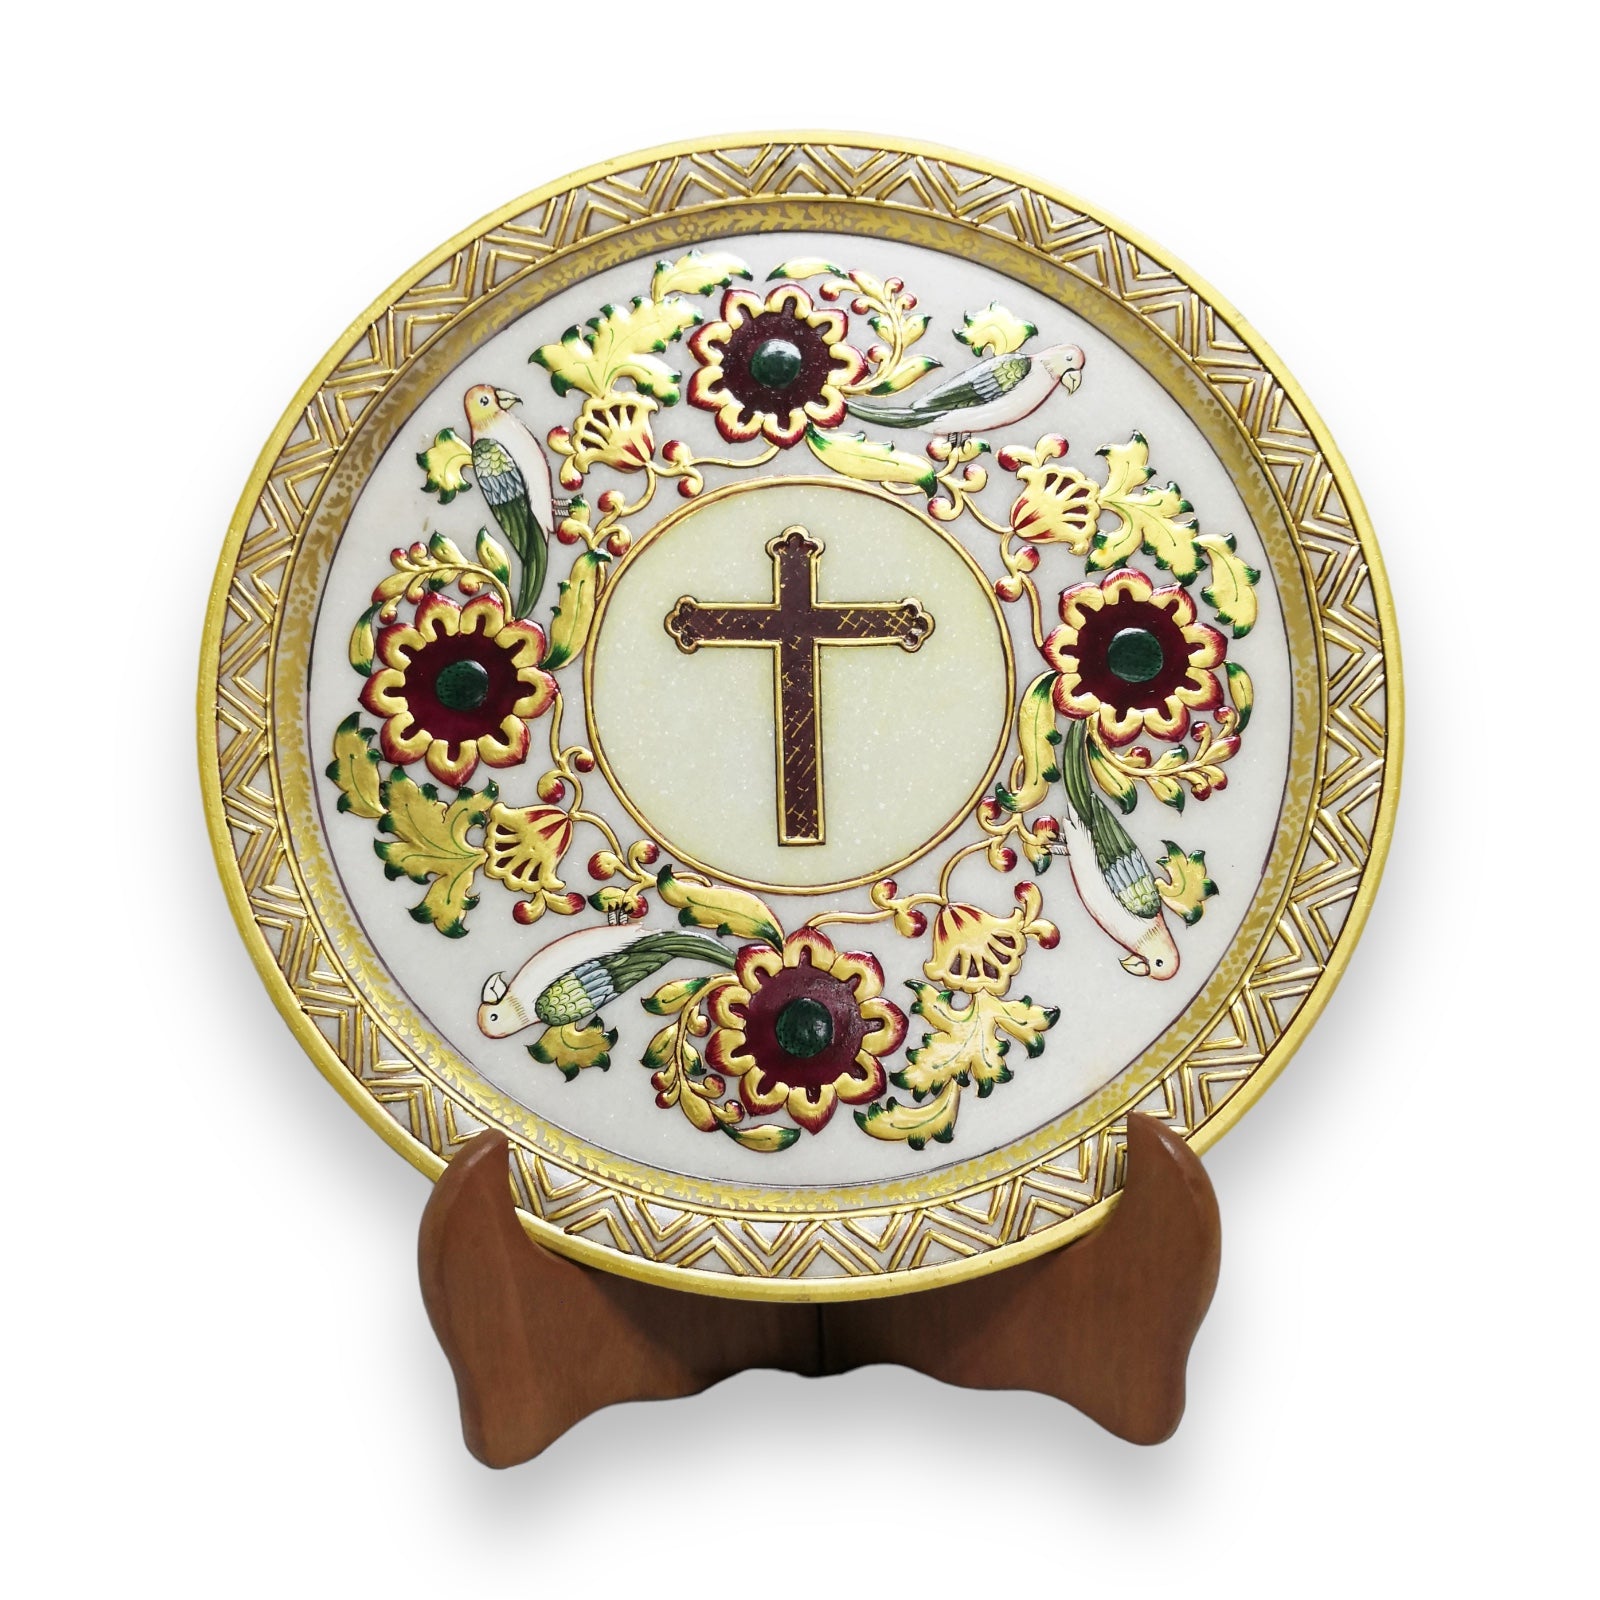 24K Gold Marble Handcrafted Catholic Jesus Cross 12" Renaissance Floral Plate